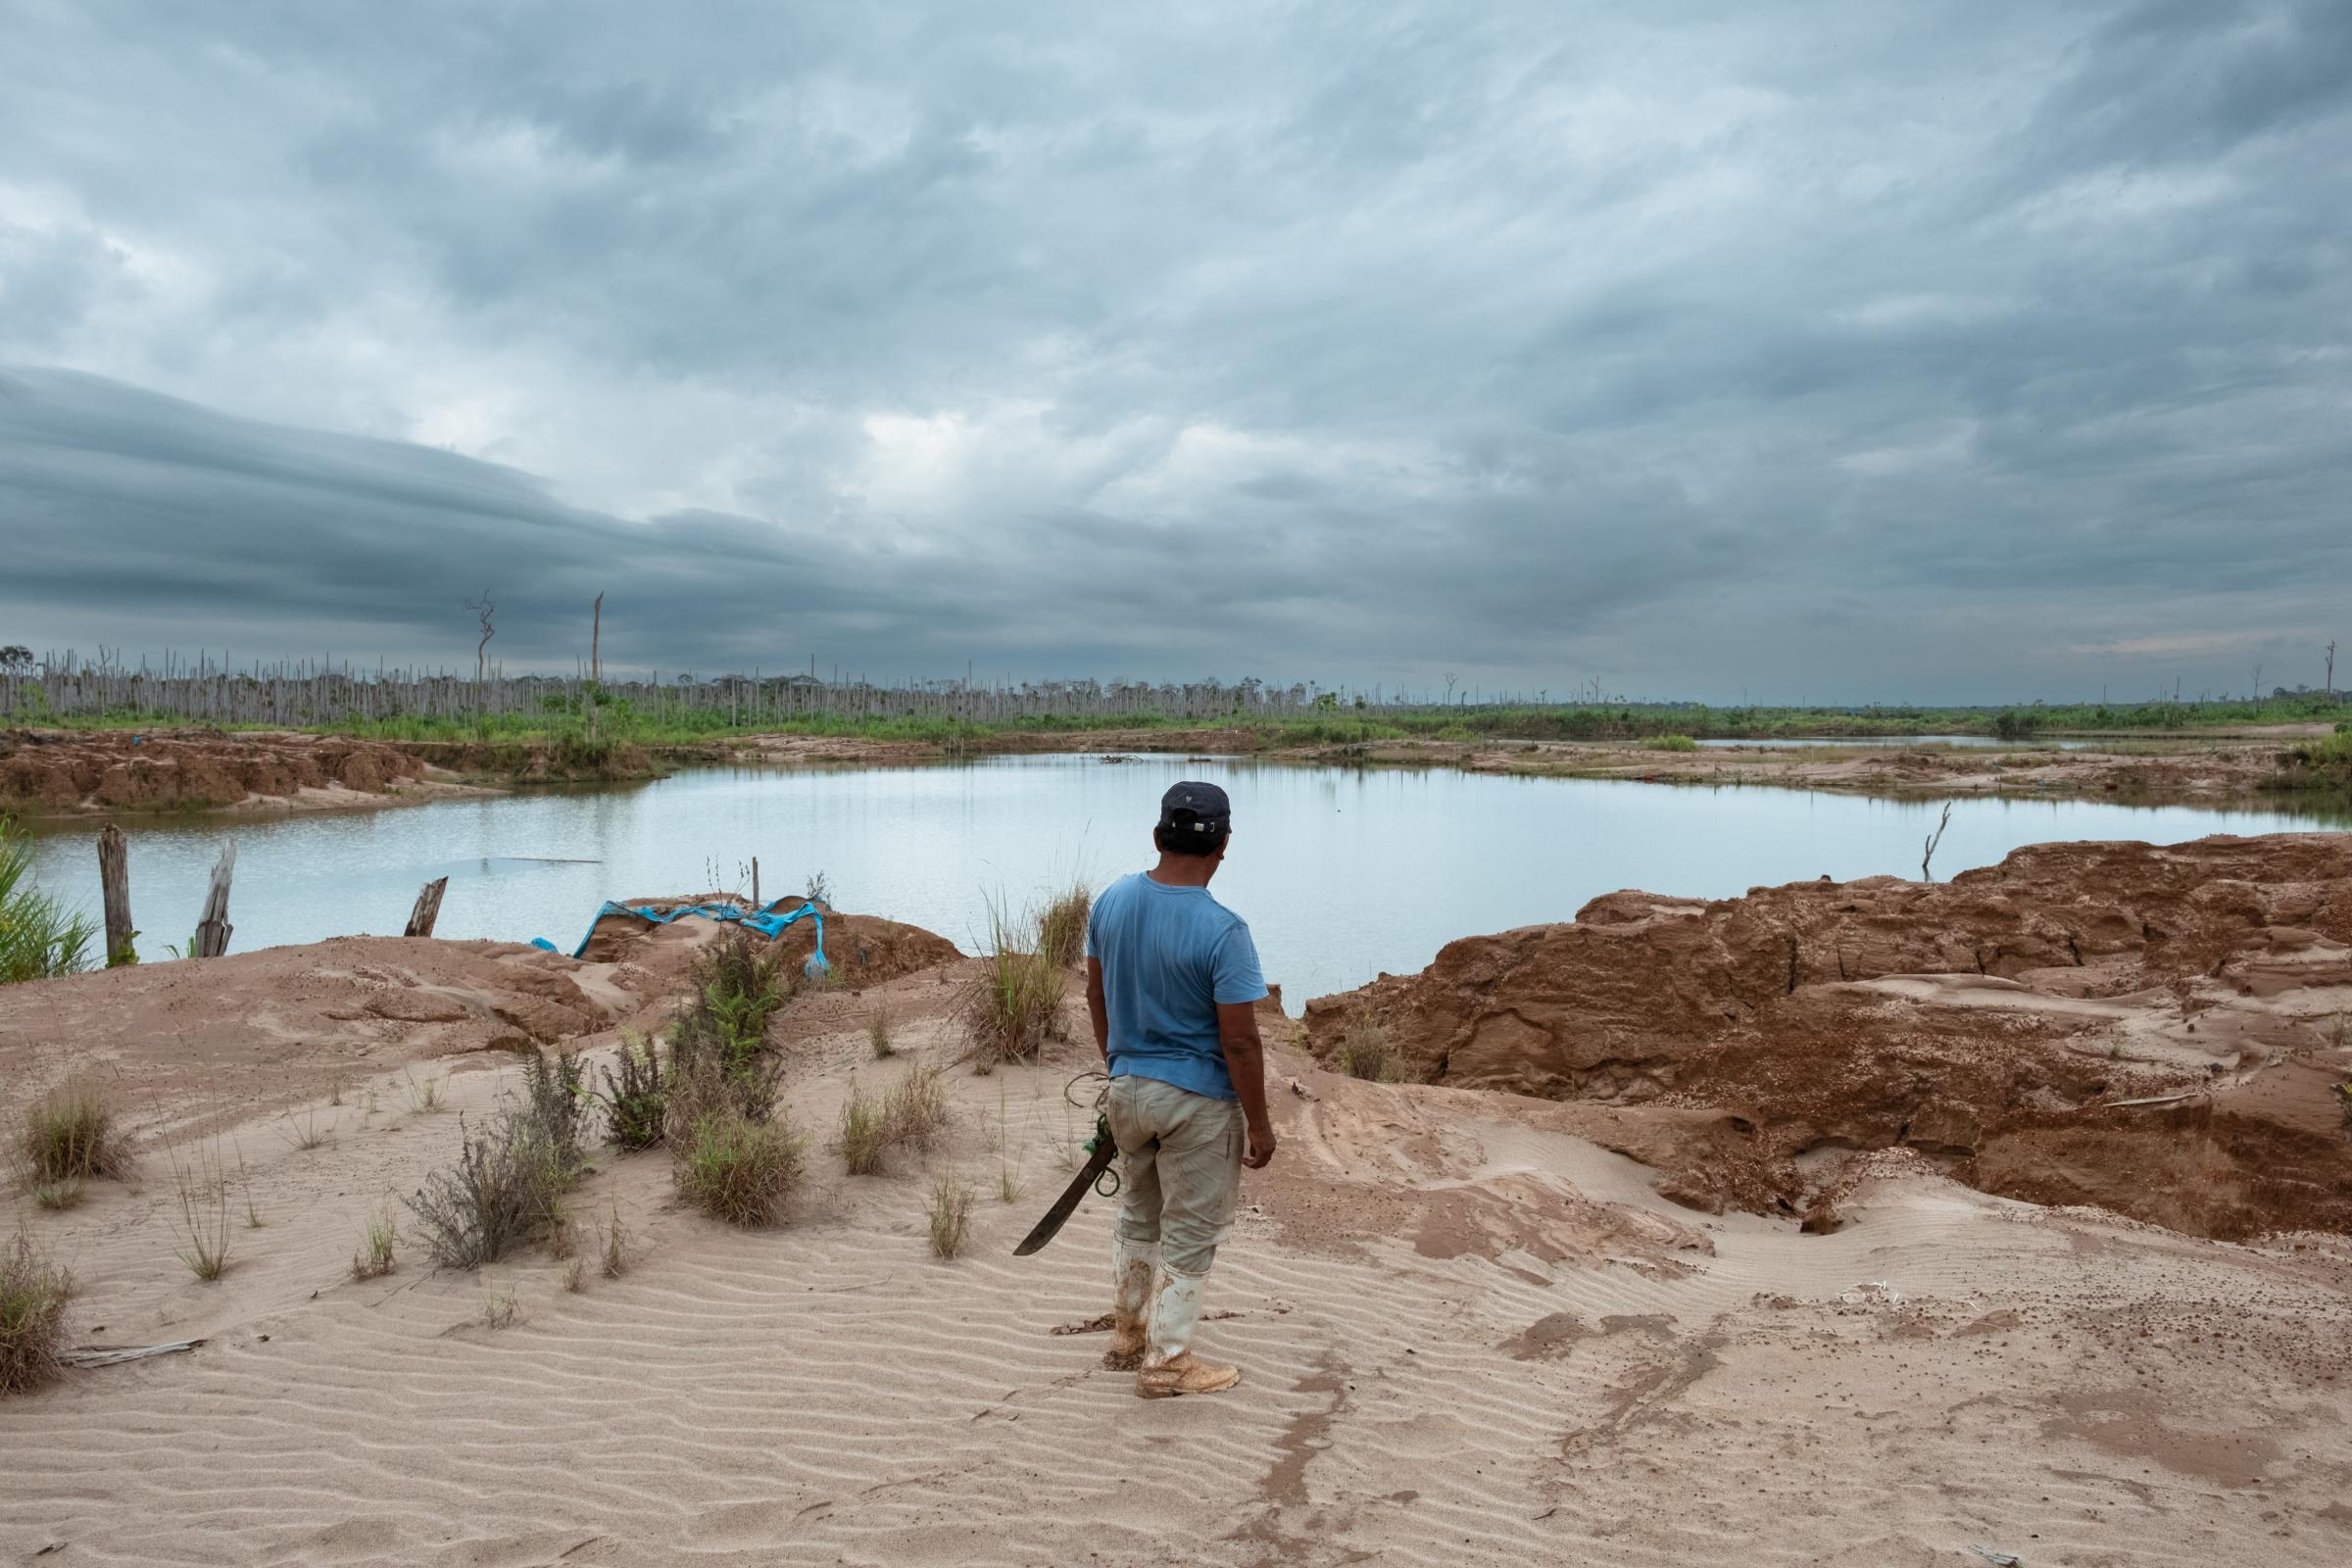 Illegal Gold Mining in La Pampa - "In La Pampa we know that there is still gold...